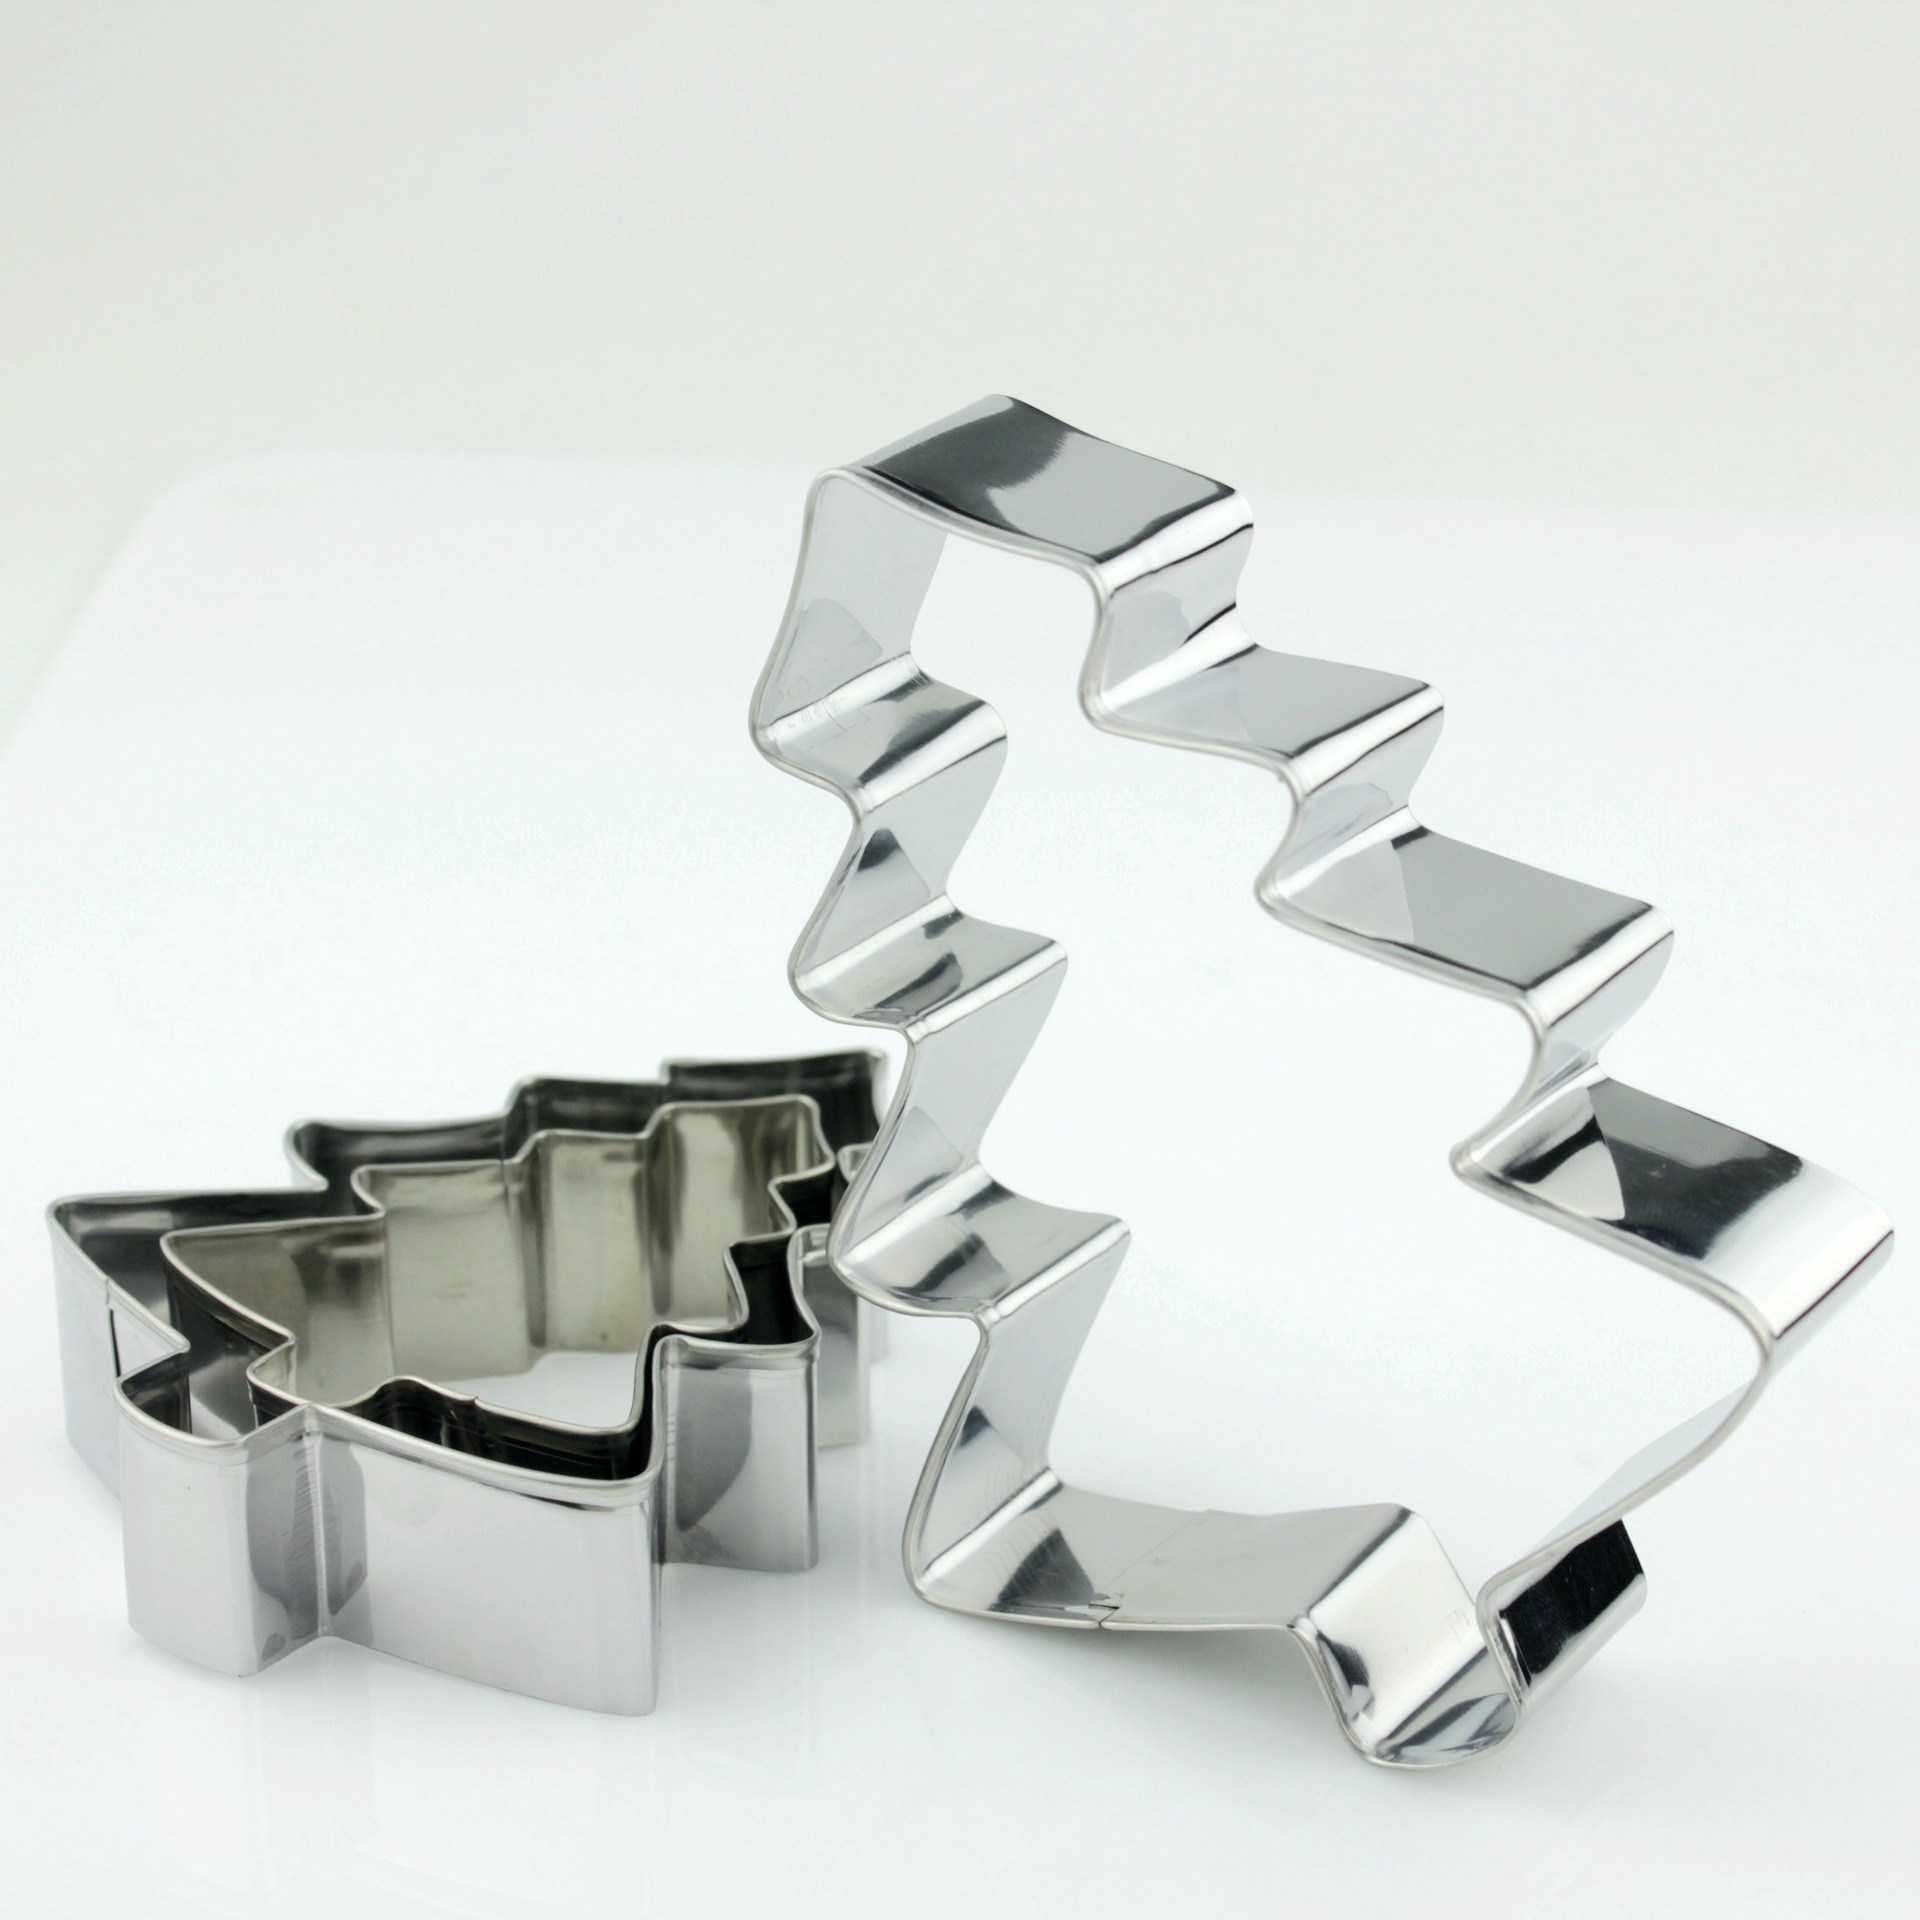 New 3 Pcs Small Large Christmas Tree Shape Mold Stainless Steel Cookie Cutter Set for Christmas